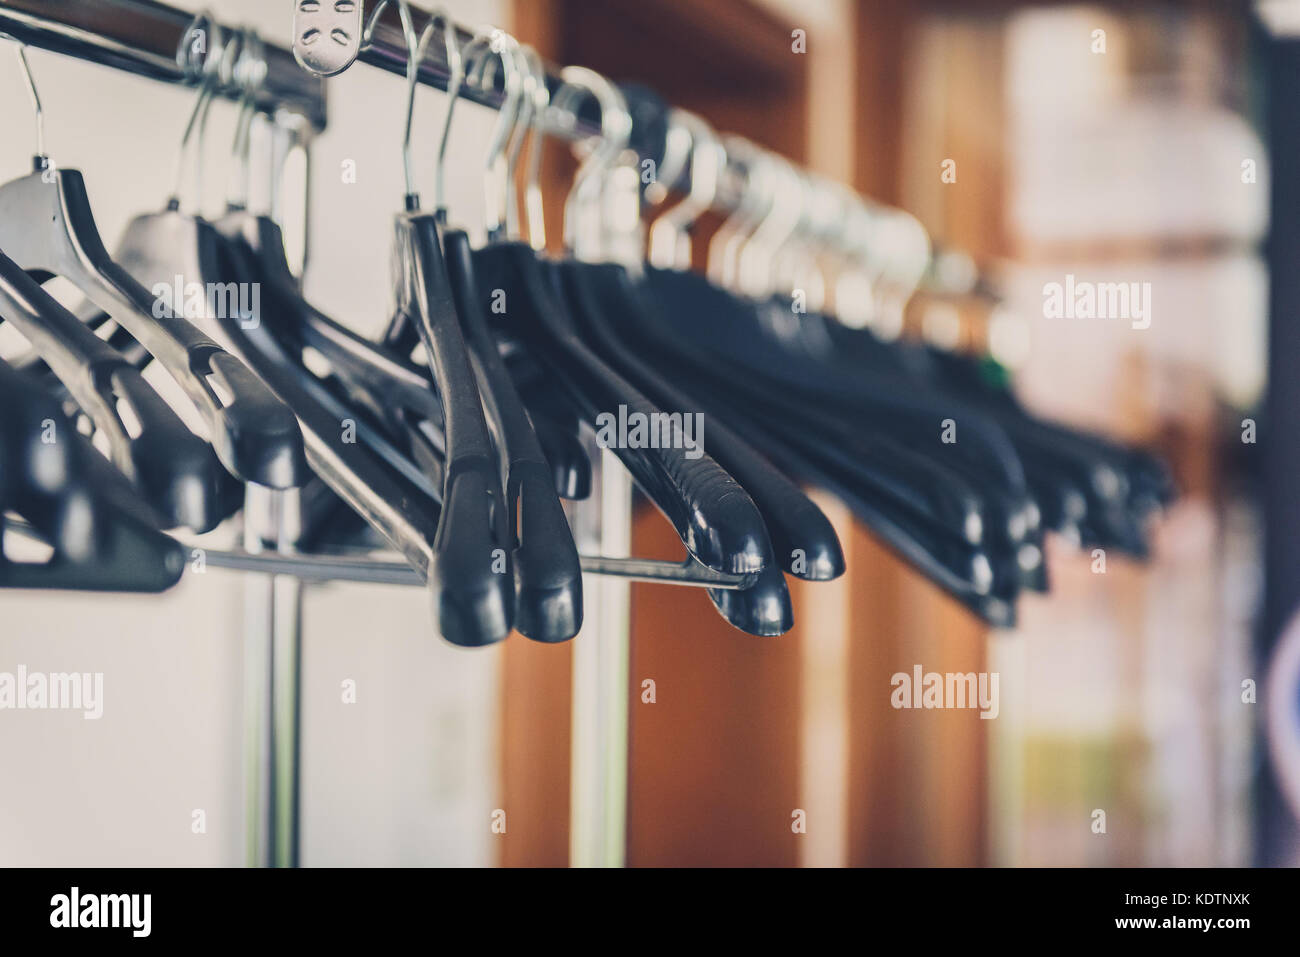 Empty wardrobe stand with black hangers at business event venue. Empty clothing rack at the theatre or business party. Stock Photo